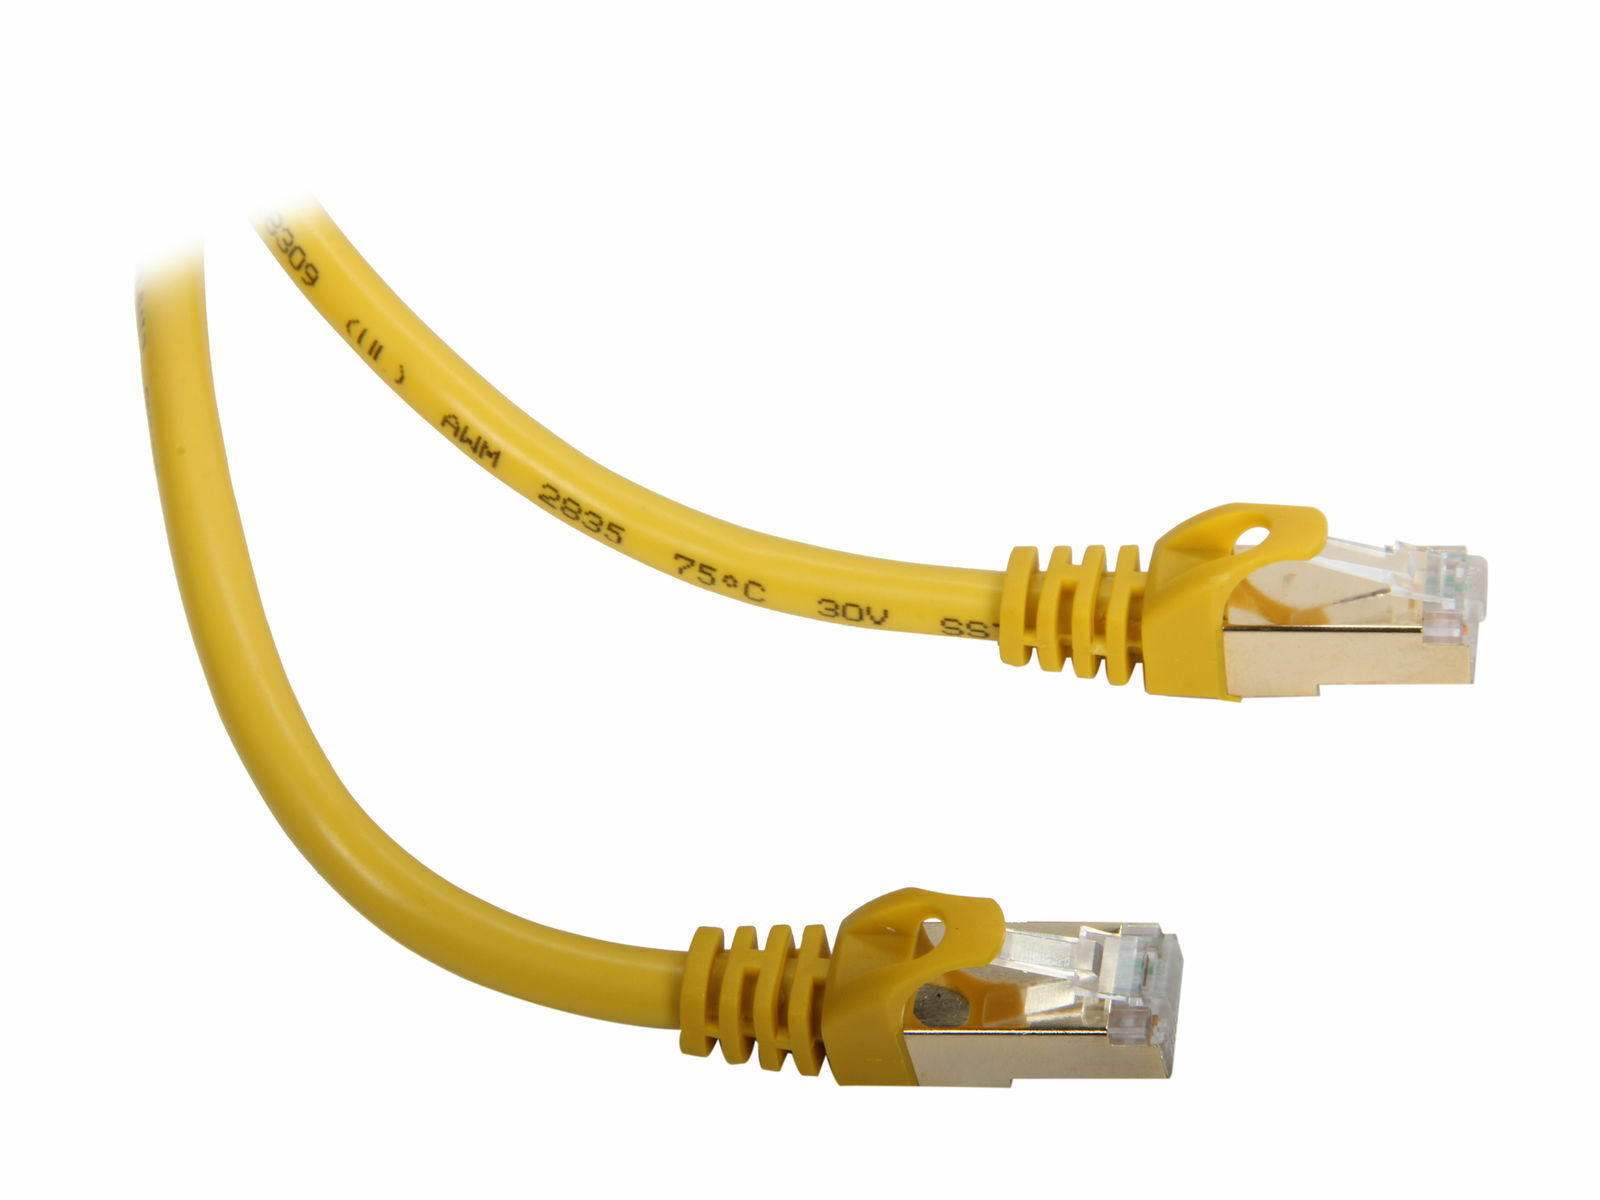 Ethernet Network Cable for Internet LAN Modem Router 3 Feet -Yellow